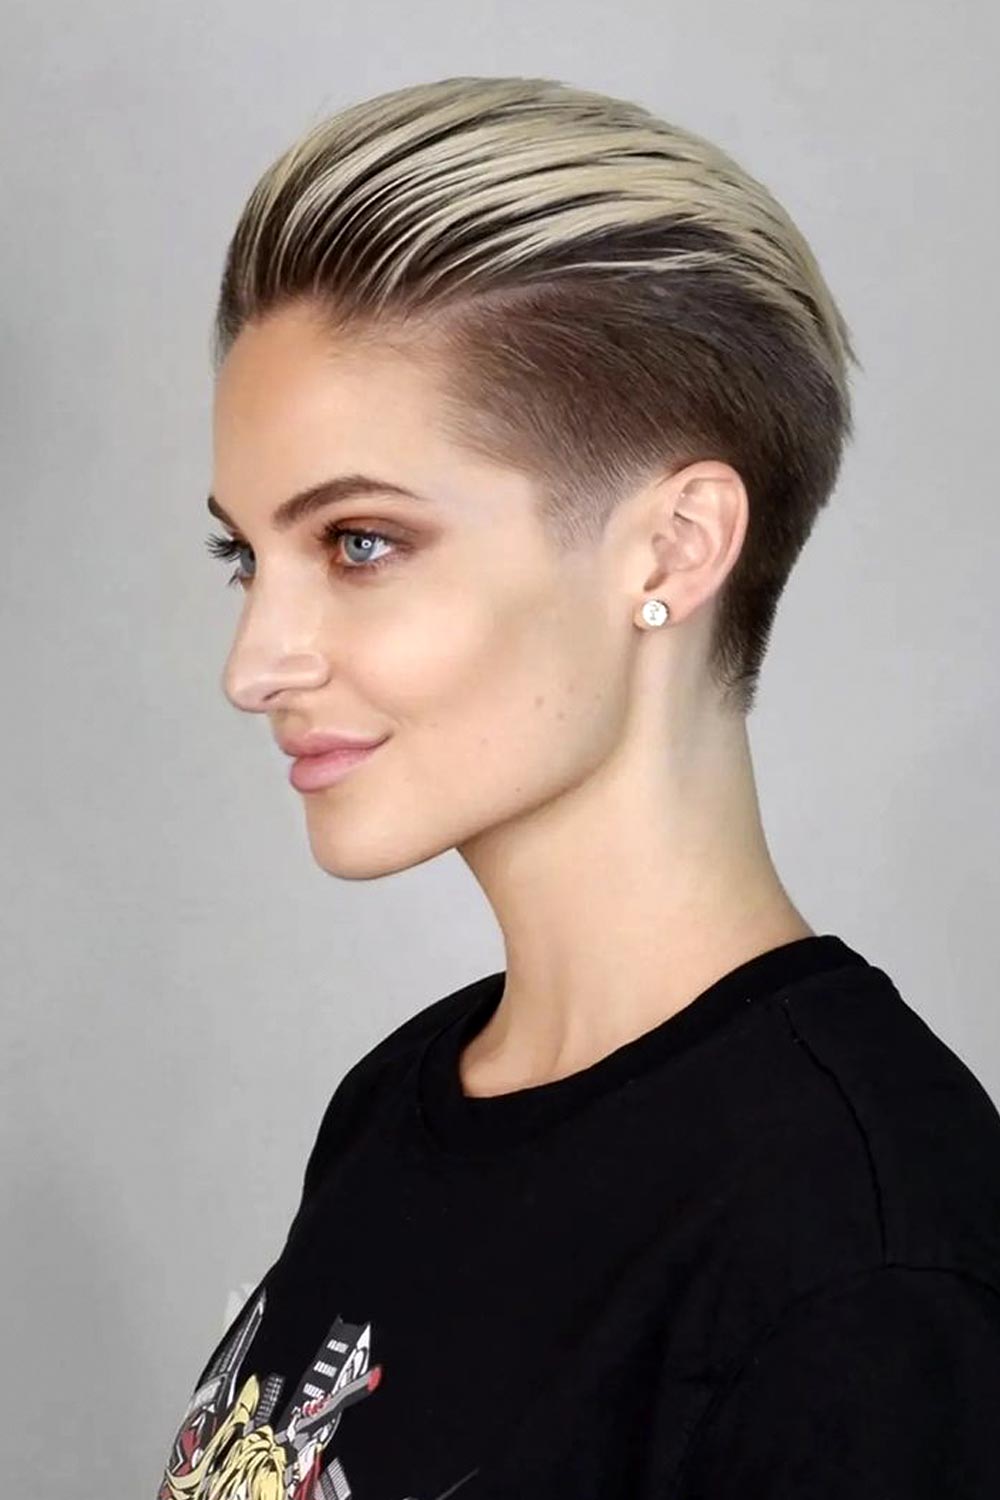 Blonde Pompadour With Low Fade